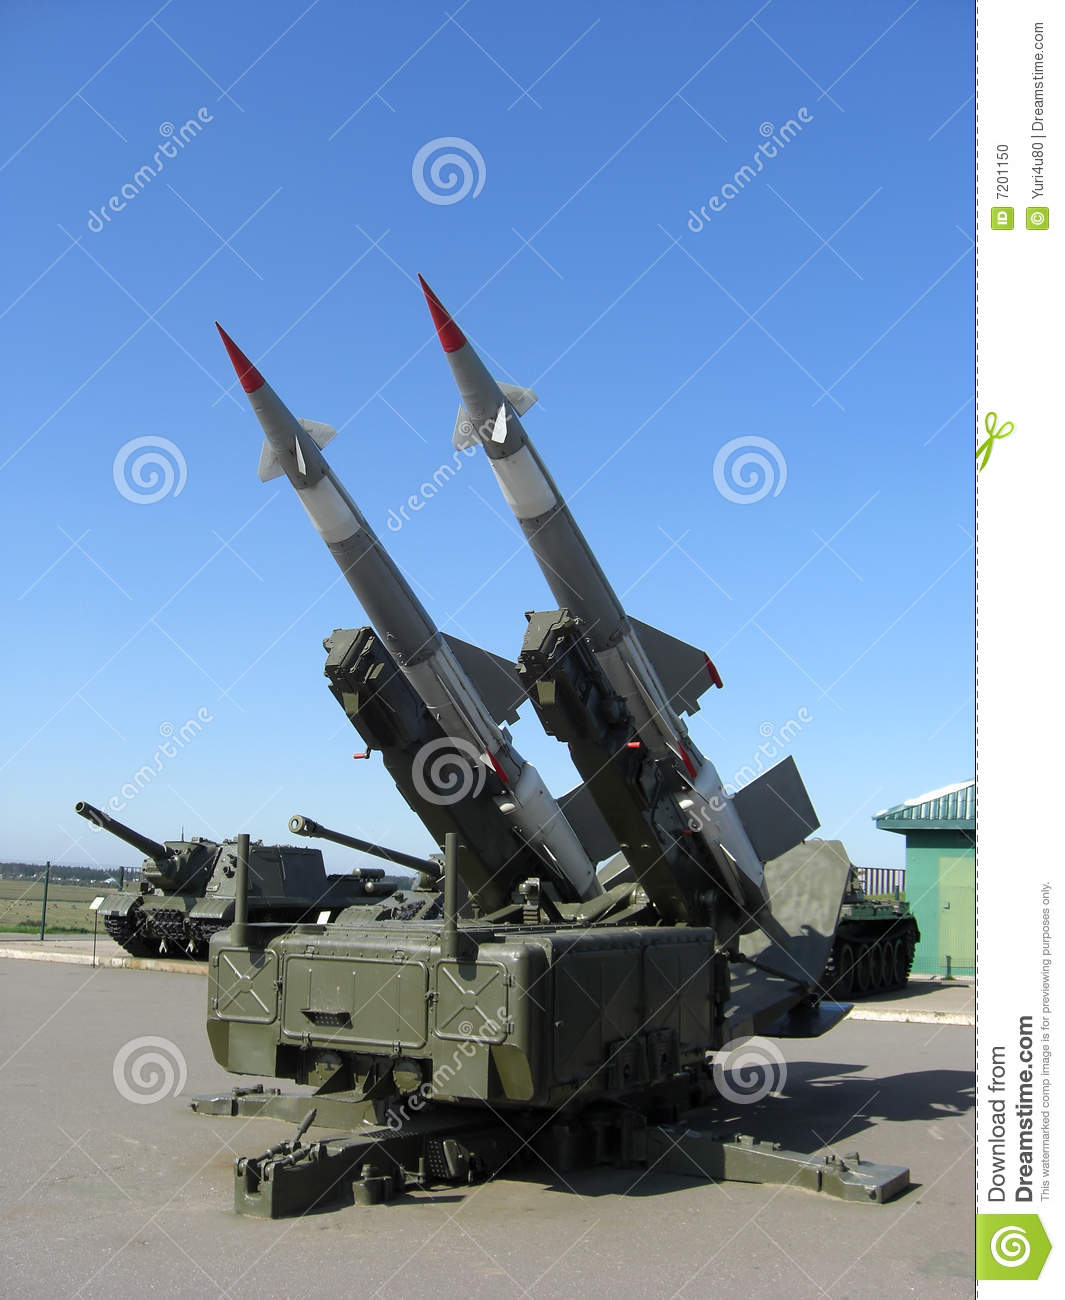 Missile Launcher Outdoors With Clear Blue Sky